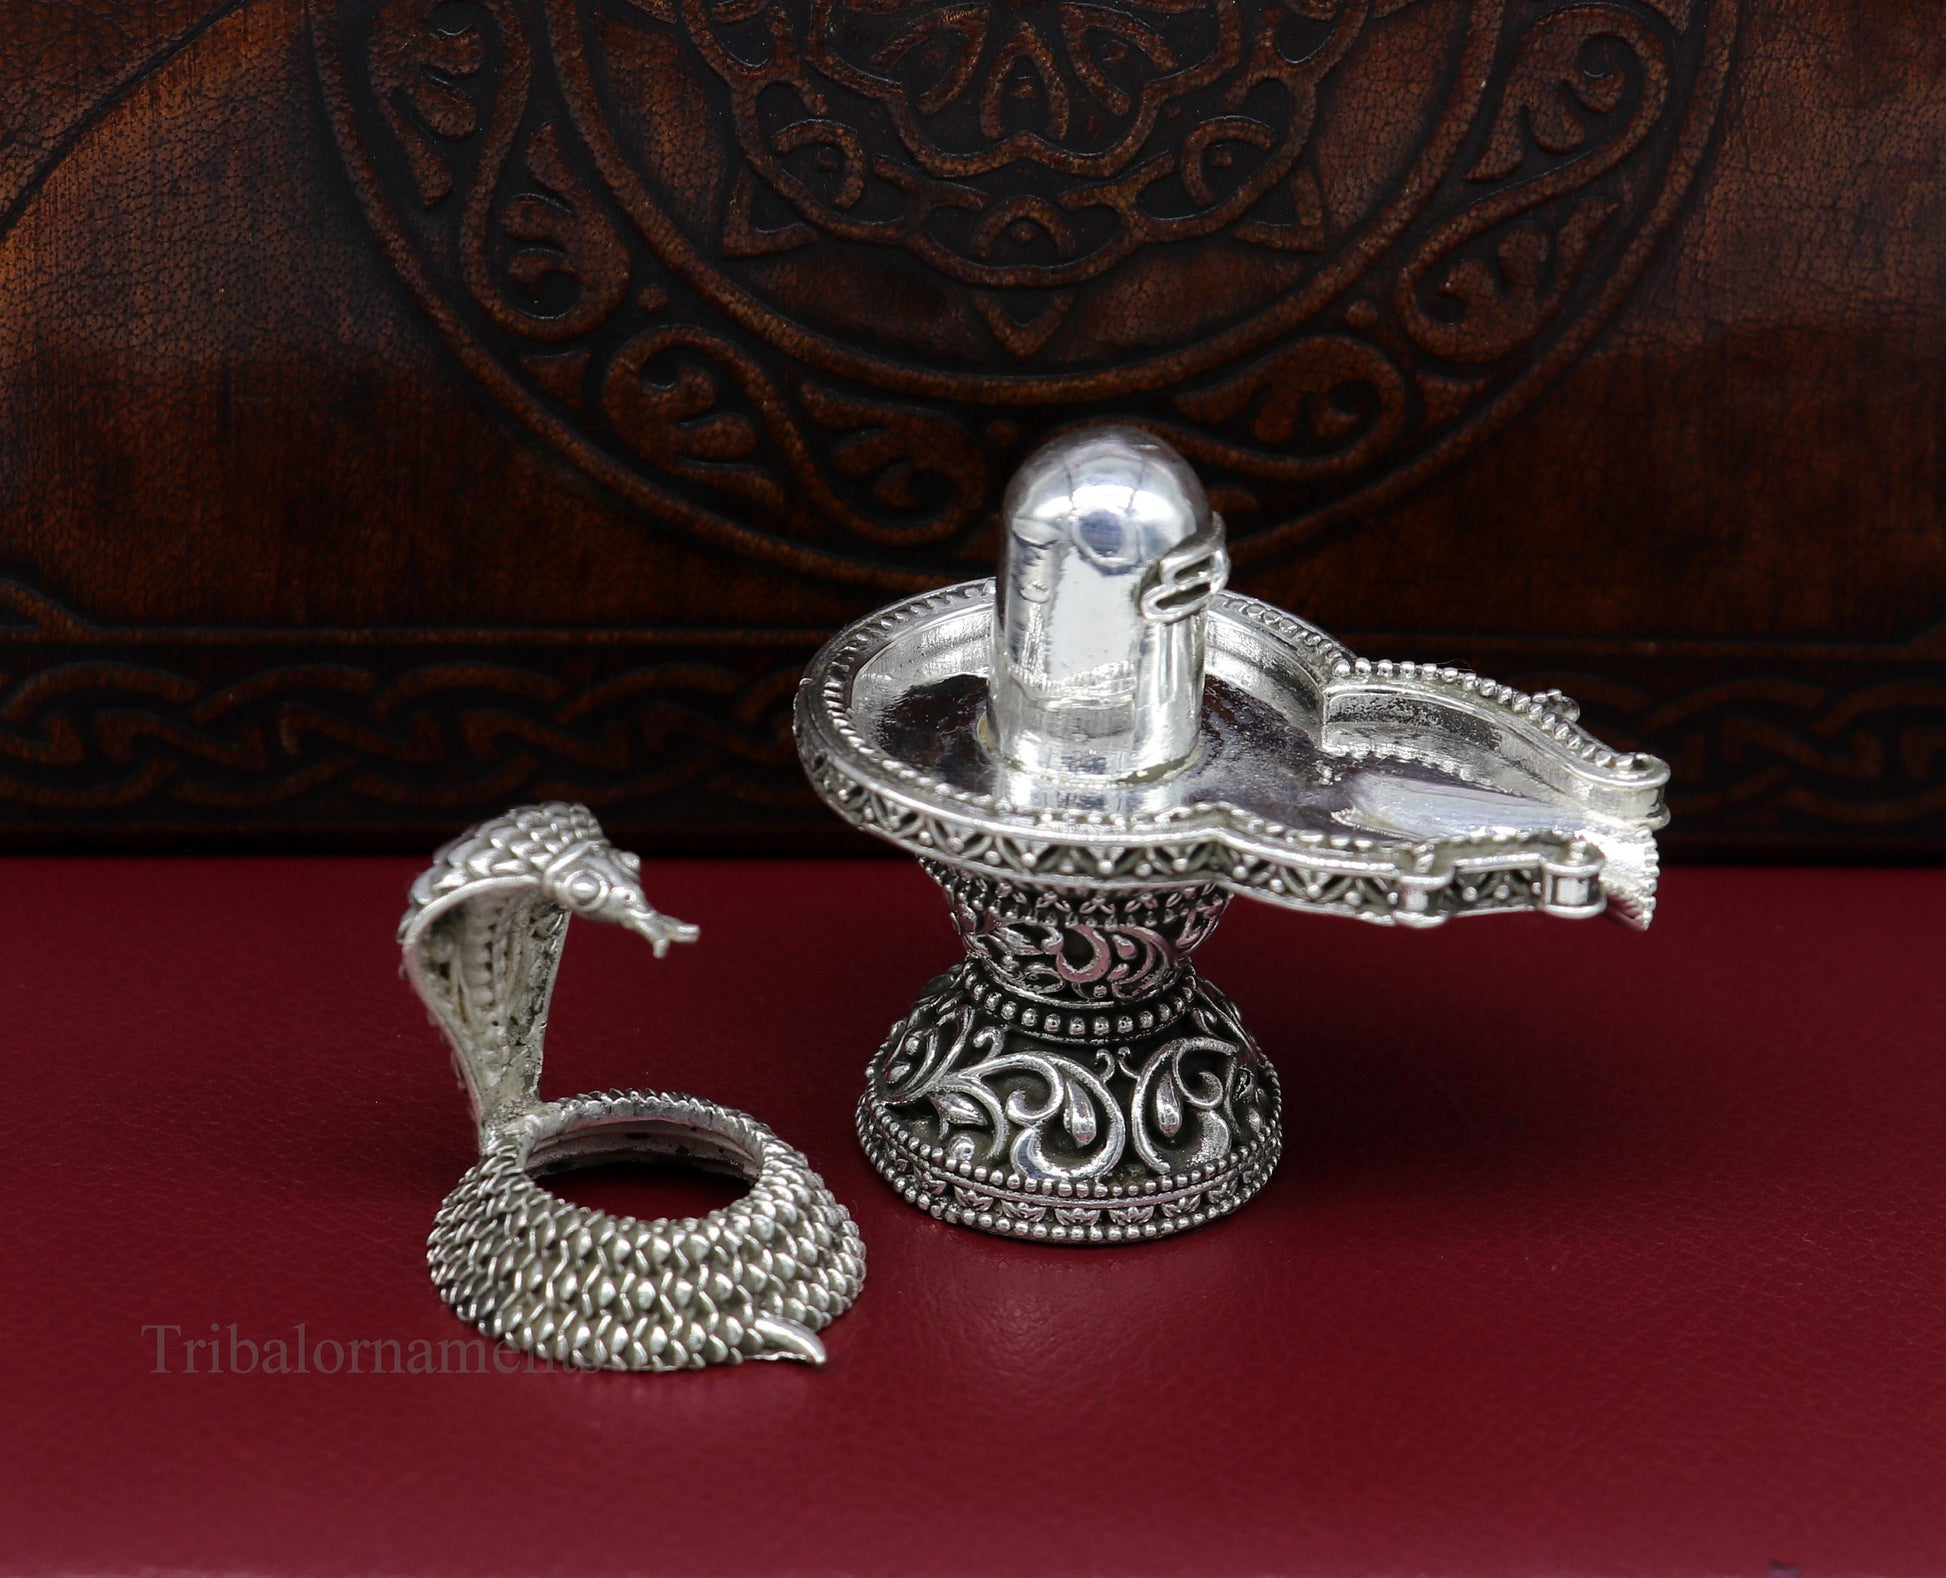 925 fine solid sterling silver lord shiva lingam Jalheri With Snake, Stunning Divine shiva lingam, awesome handmade temple article su481 - TRIBAL ORNAMENTS